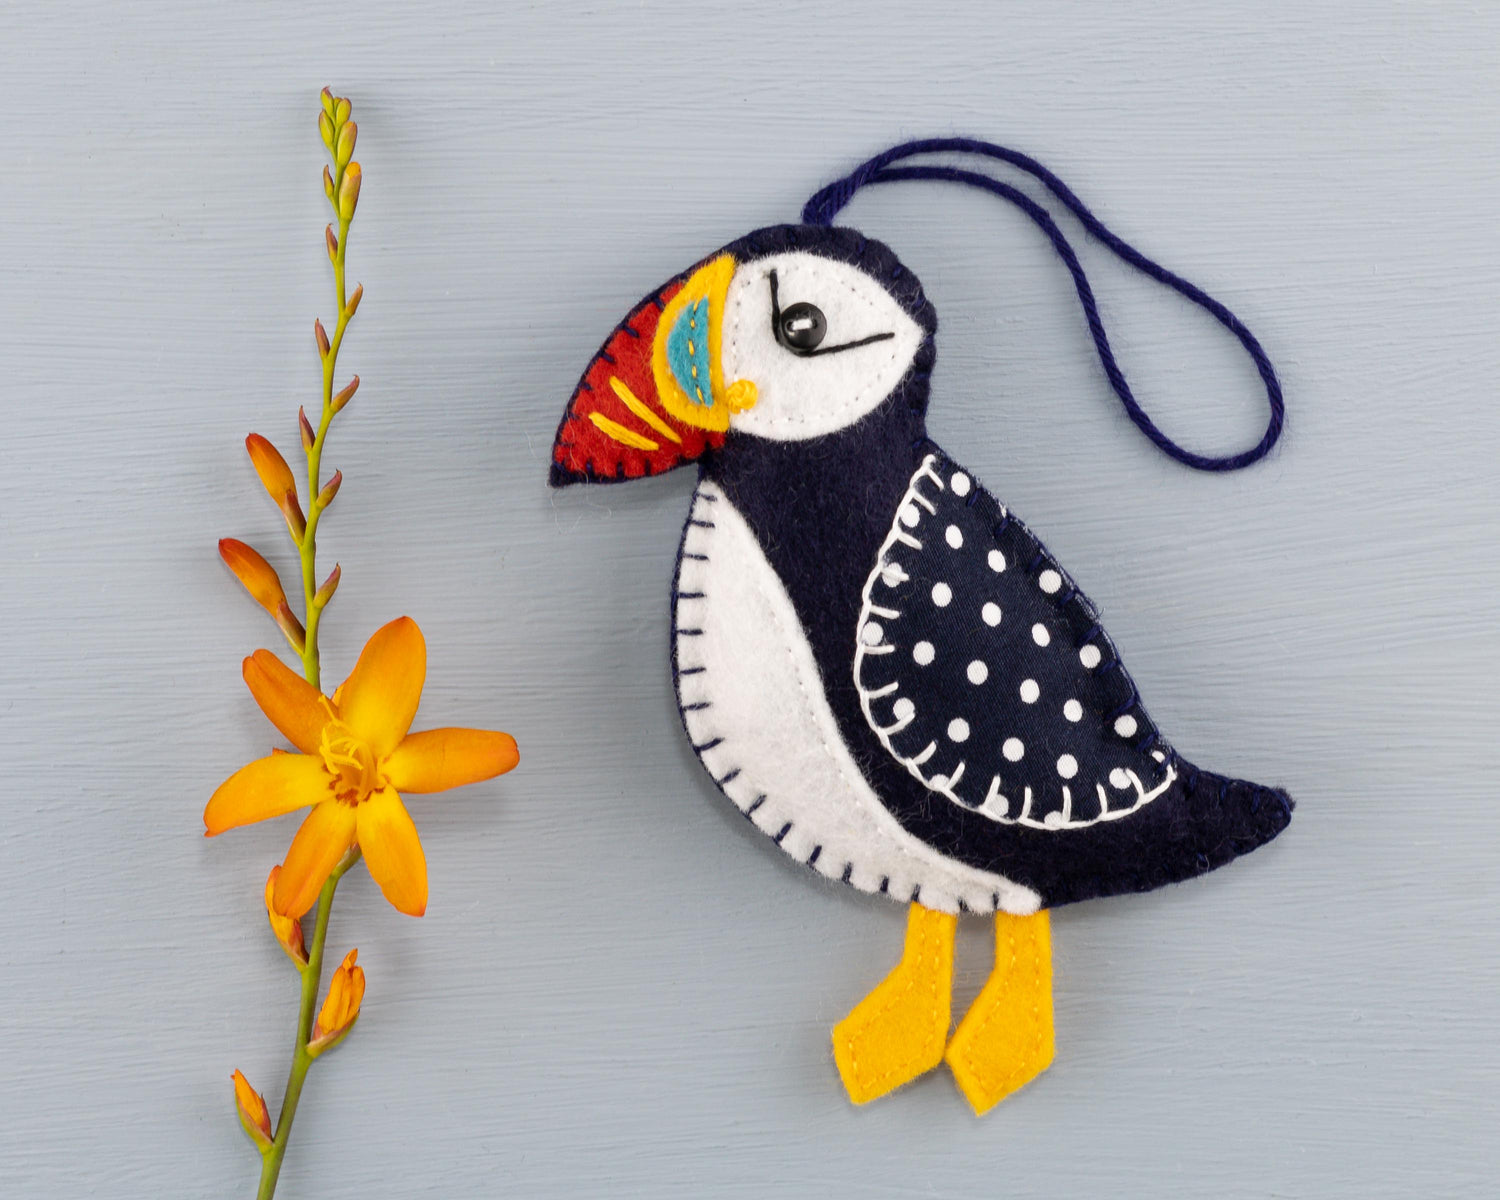 Puffin Ornaments and Gifts